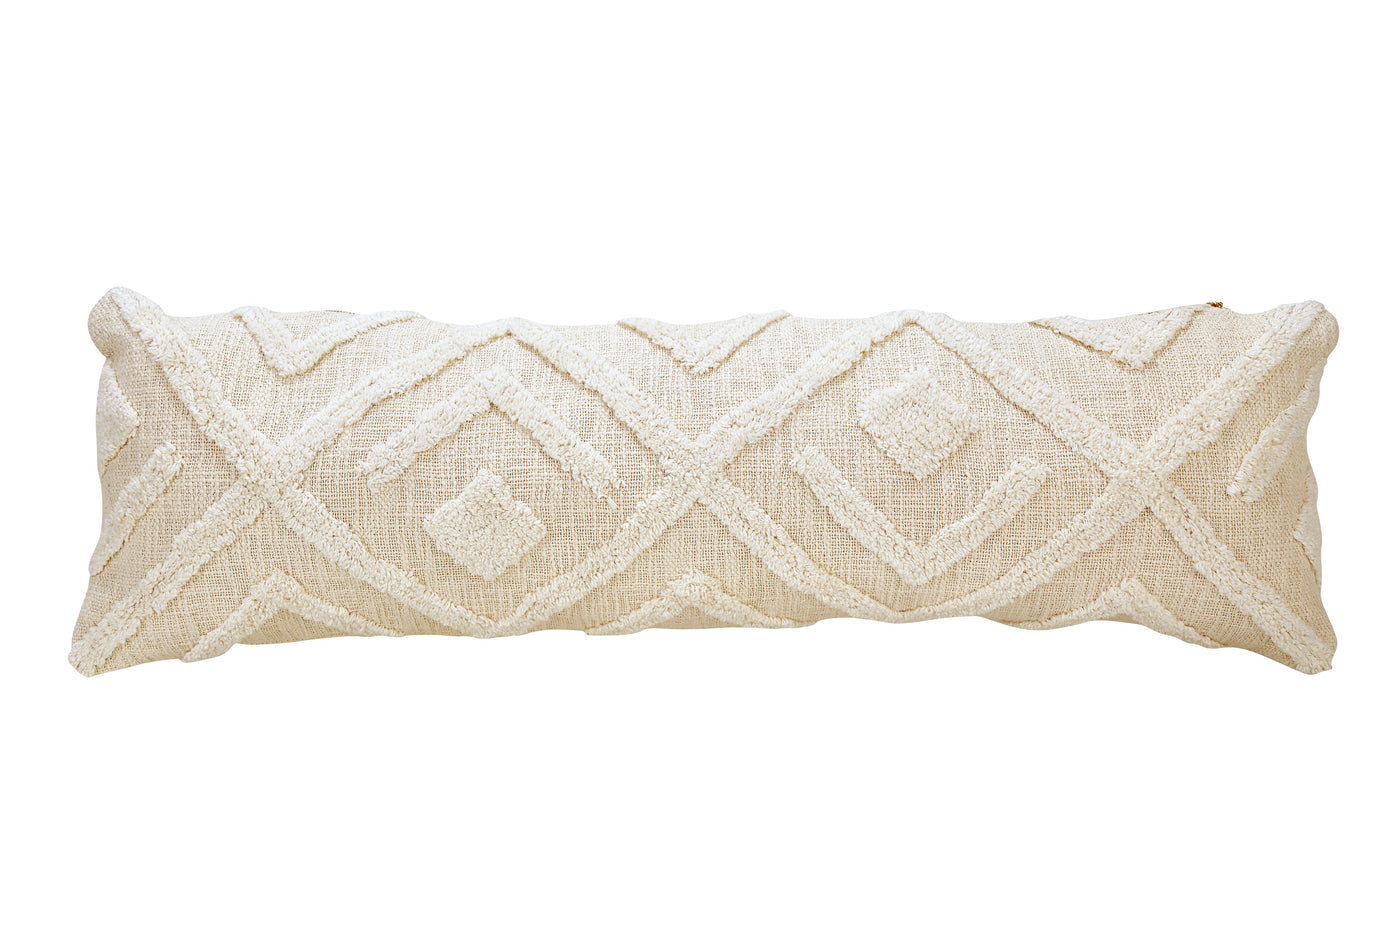 Casaamarosa CUSHIONS Snow Tufted XL Lumbar Pillow, Off White - 12x38 Inch CCL-P-13 12x38 / Cotton / With Filler